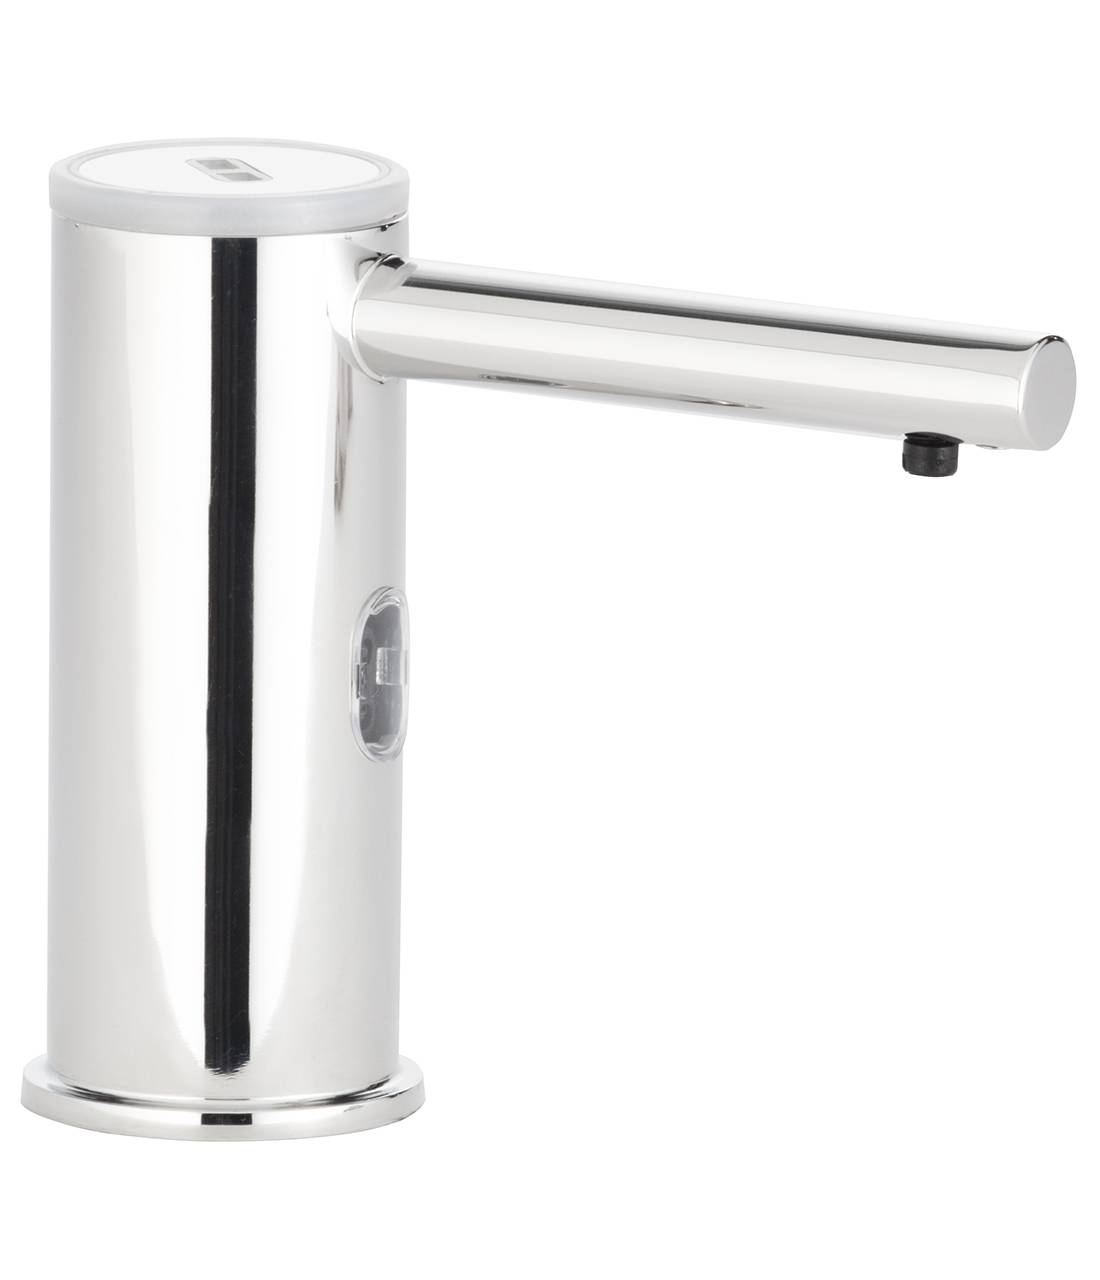 Counter-Mounted, Automatic, Top-Fill Bulk Liquid Soap Dispenser G-8258 - Counter-Mounted Liquid Soap Dispenser